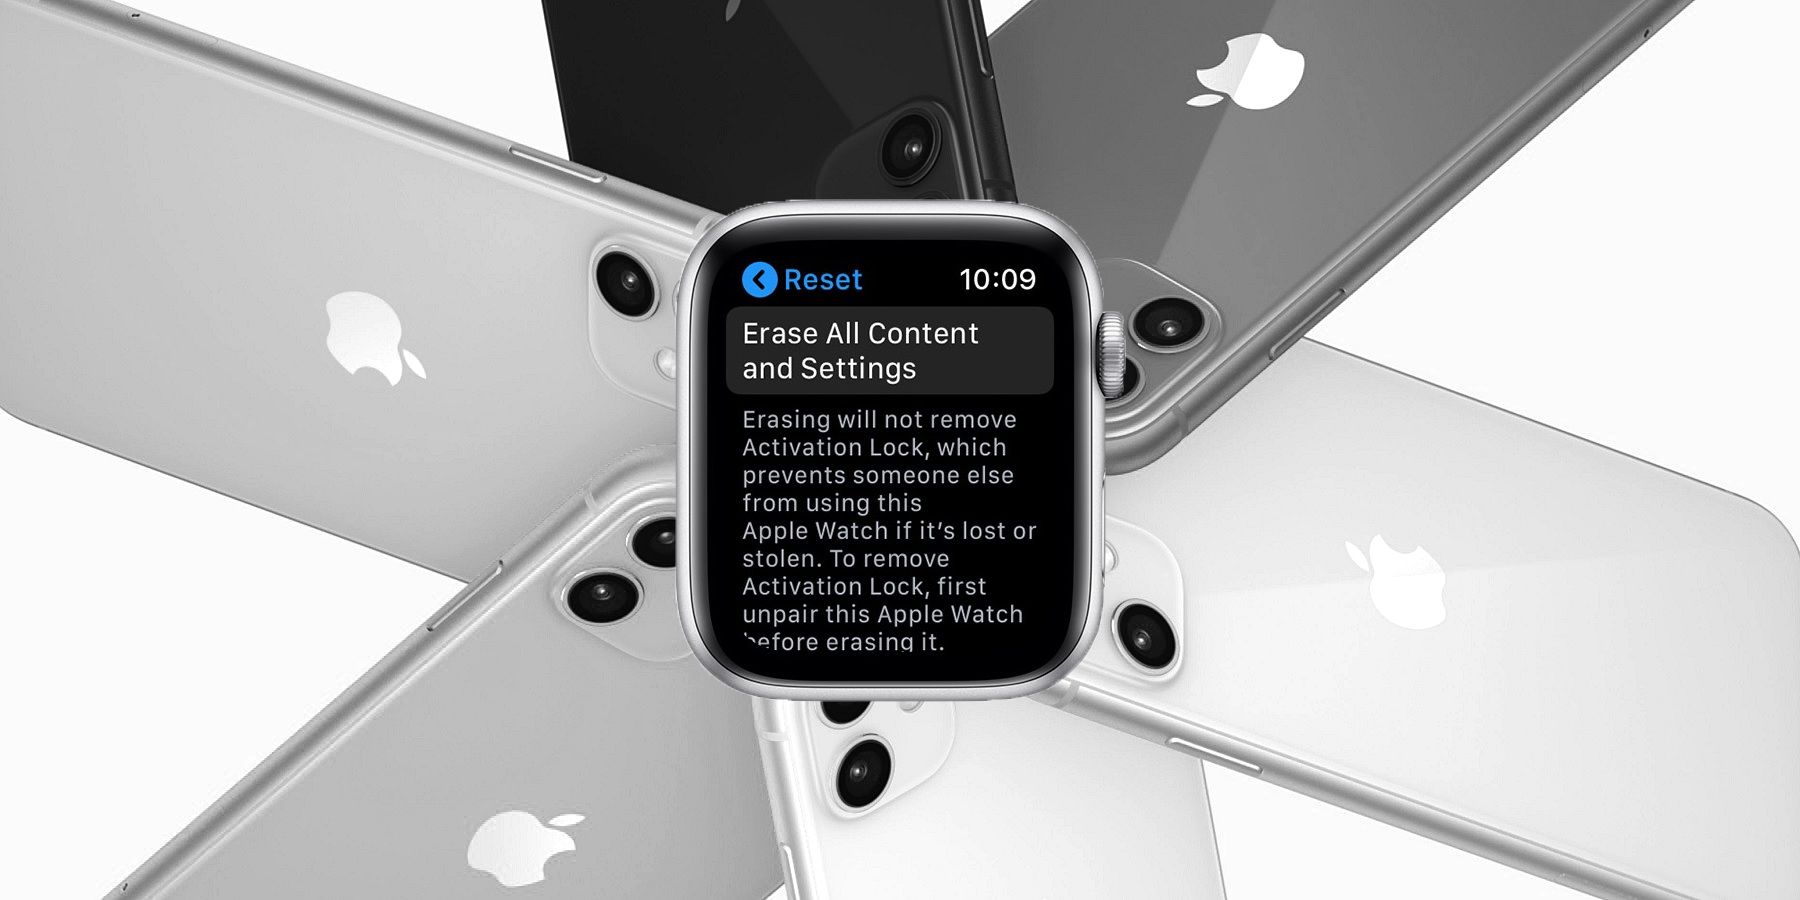 How To Reset & Erase Apple Watch Without A Paired Phone